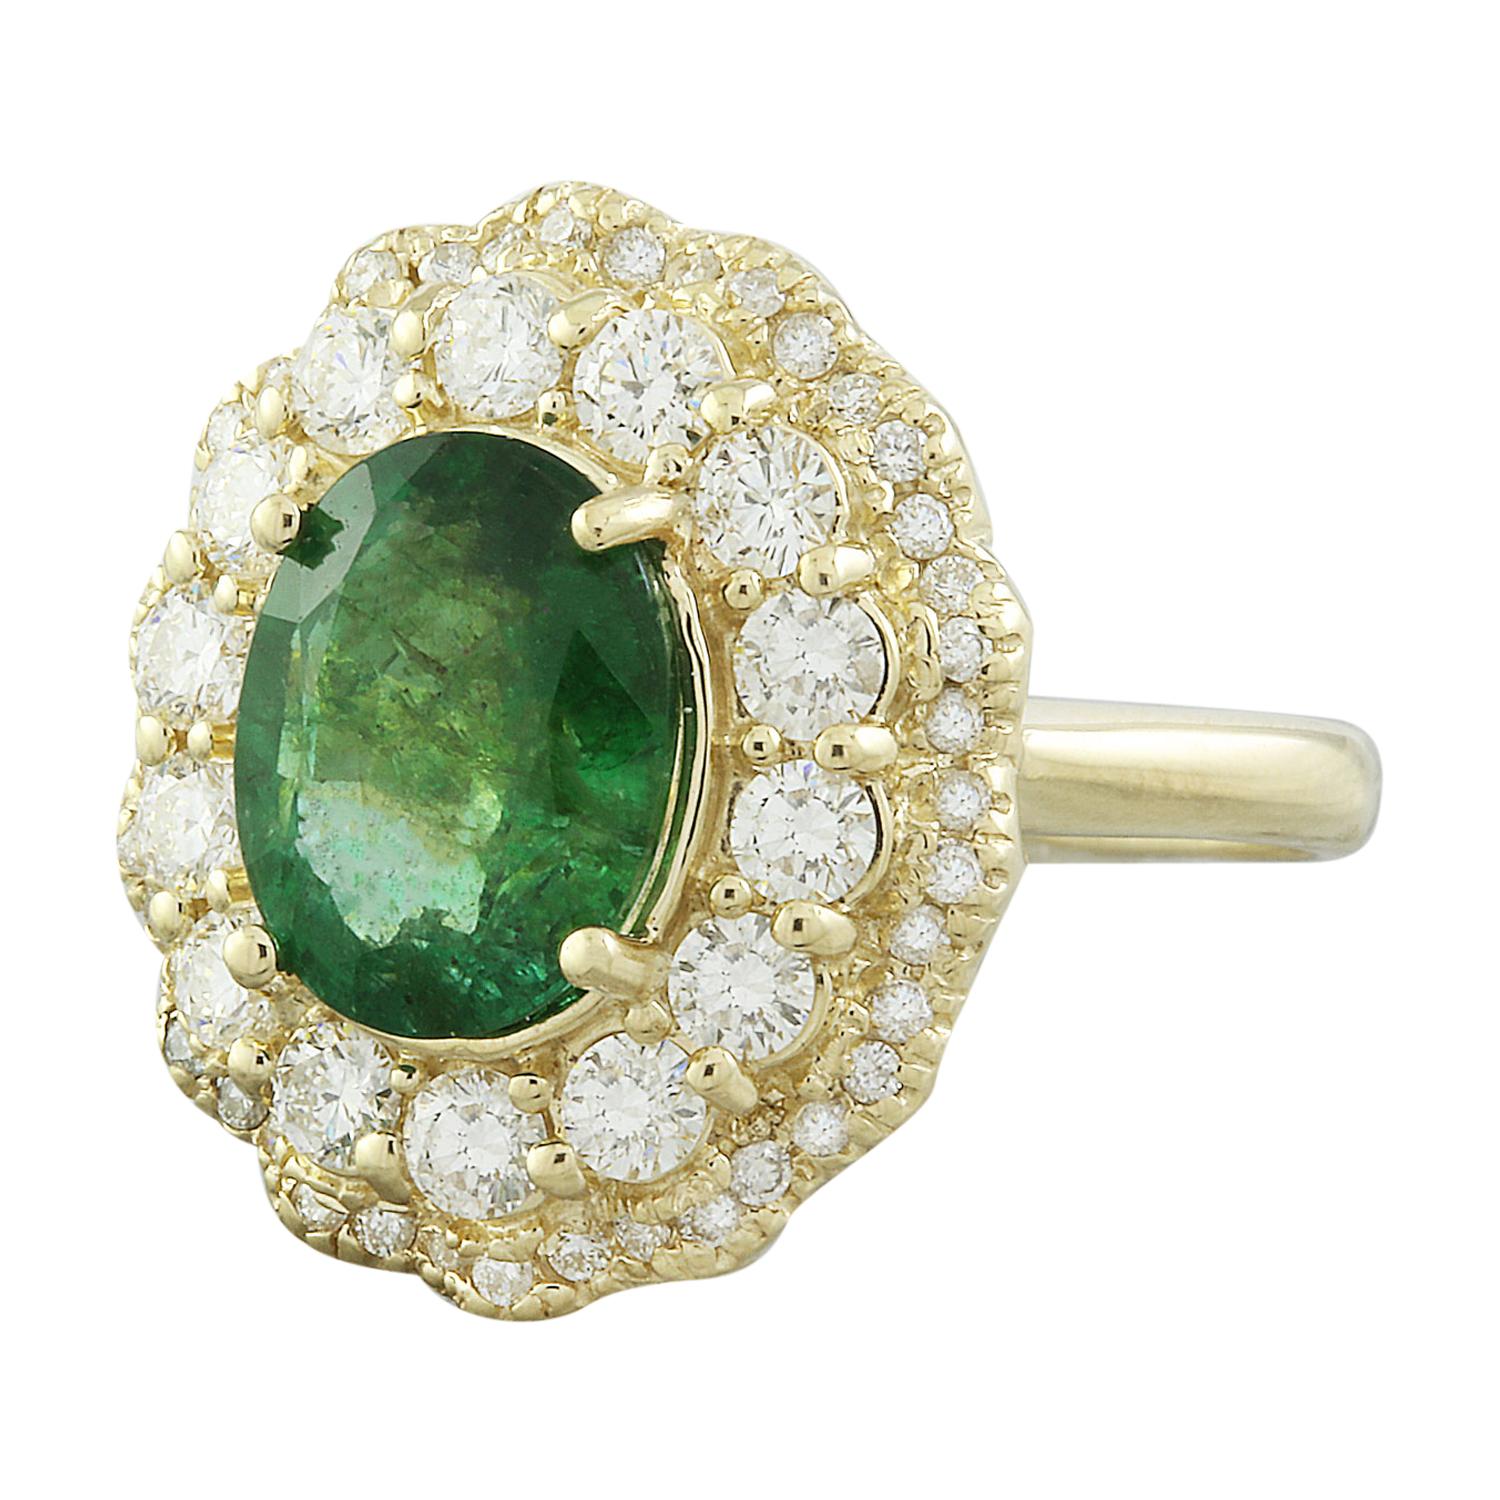 Introducing our stunning 4.84 Carat Natural Emerald 14K Solid Yellow Gold Diamond Ring. Crafted from stamped 14K solid yellow gold, this ring has a total weight of 8 grams, ensuring both quality and durability. The centerpiece features a captivating